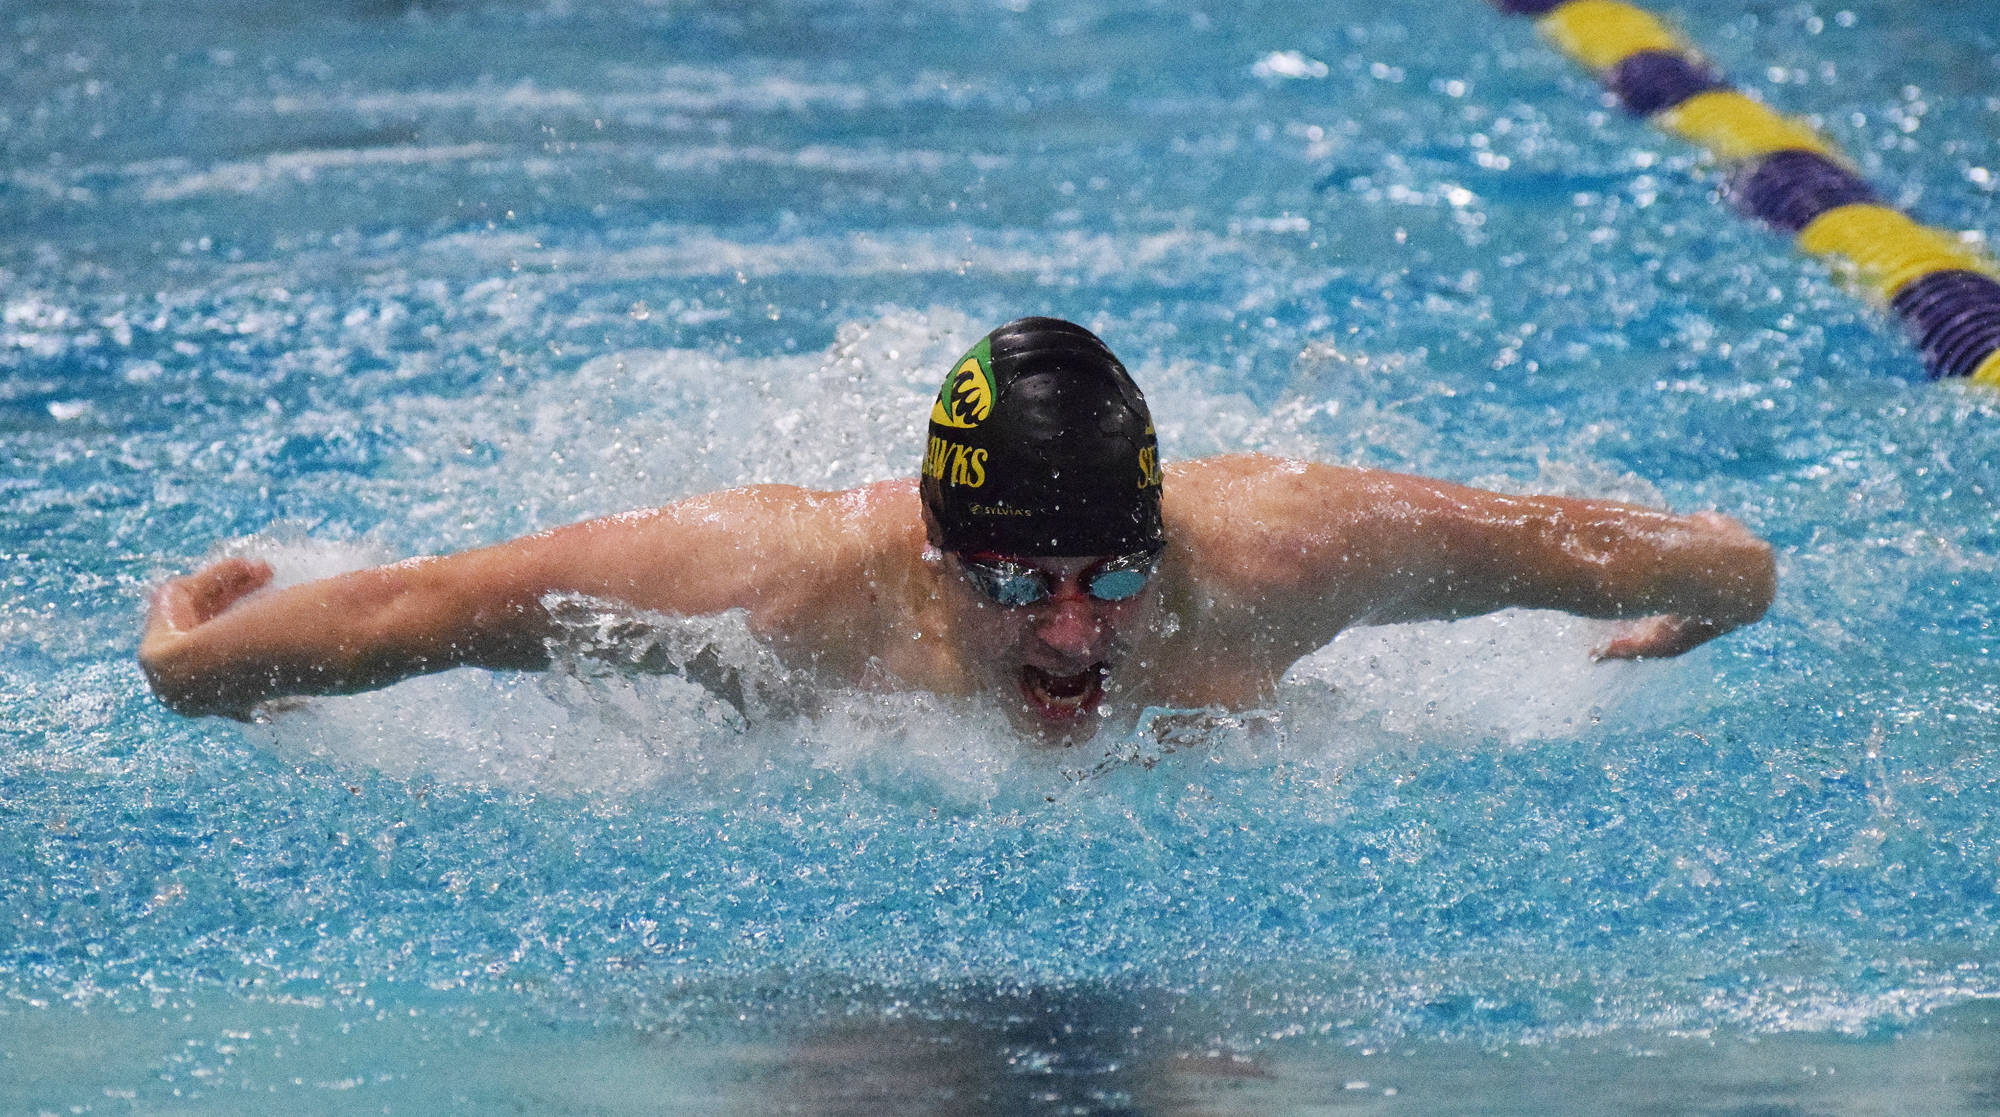 Seward’s Connor Spanos races in the boys 100-yard butterfly final Saturday at the ASAA First National Bank State Swimming & Diving Championships at the Bartlett High pool. (Photo by Joey Klecka/Peninsula Clarion)